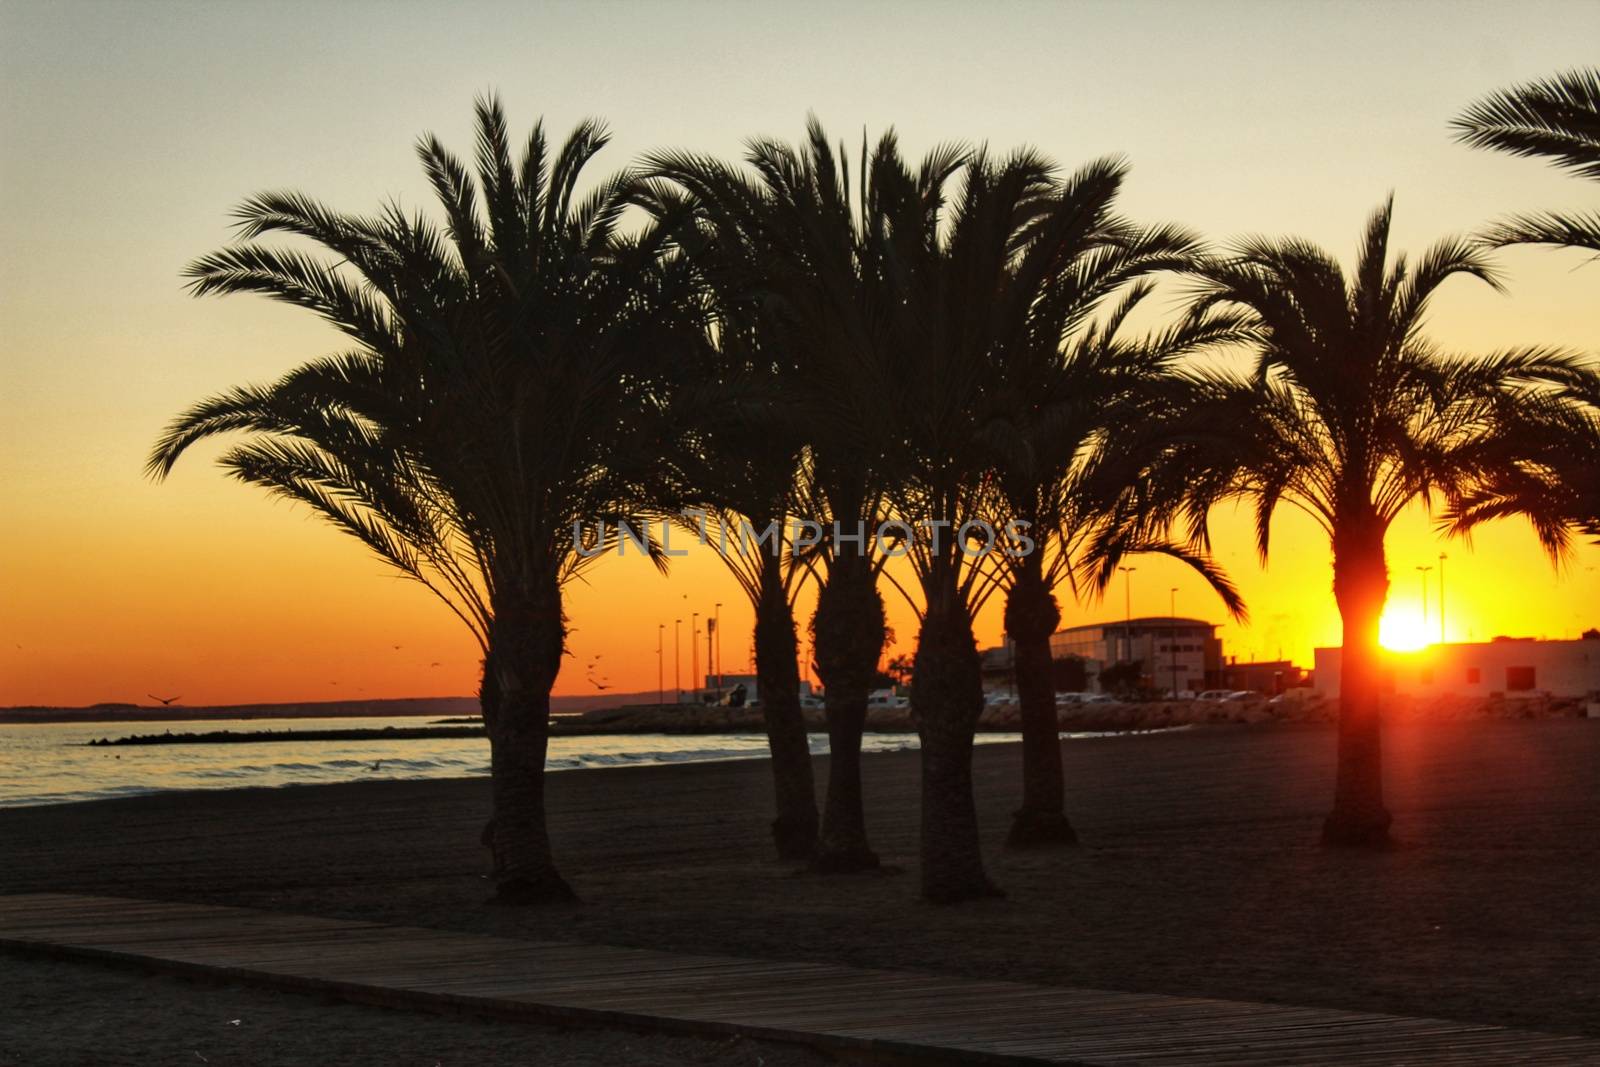 Sunset in an oasis of palm trees on the beach in southern Spain by soniabonet